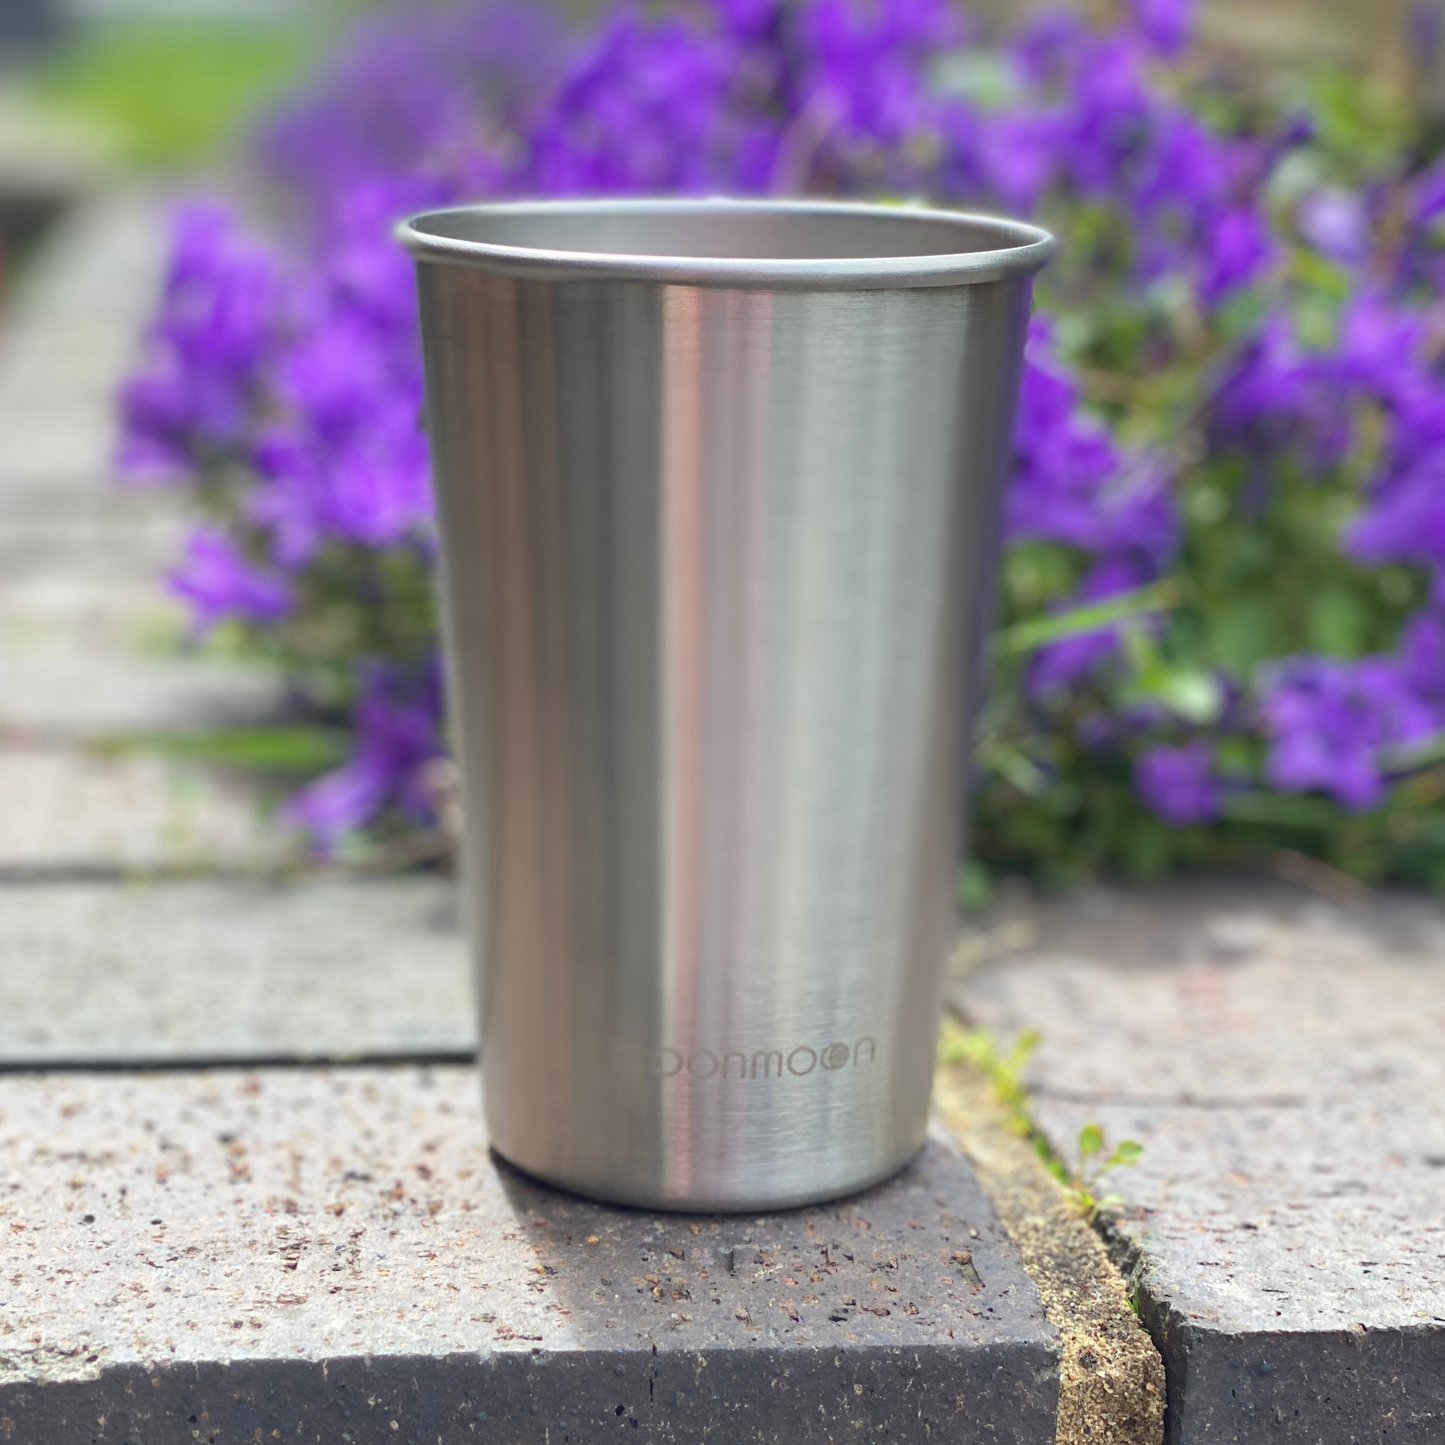 premium stainless steel cups uk branded moomoon eco friendly cups reusable stainless steel cups for sale stainless steel cups for kids stainless steel cups wholesale stainless steel cups near me stainless steel cups supplier UK